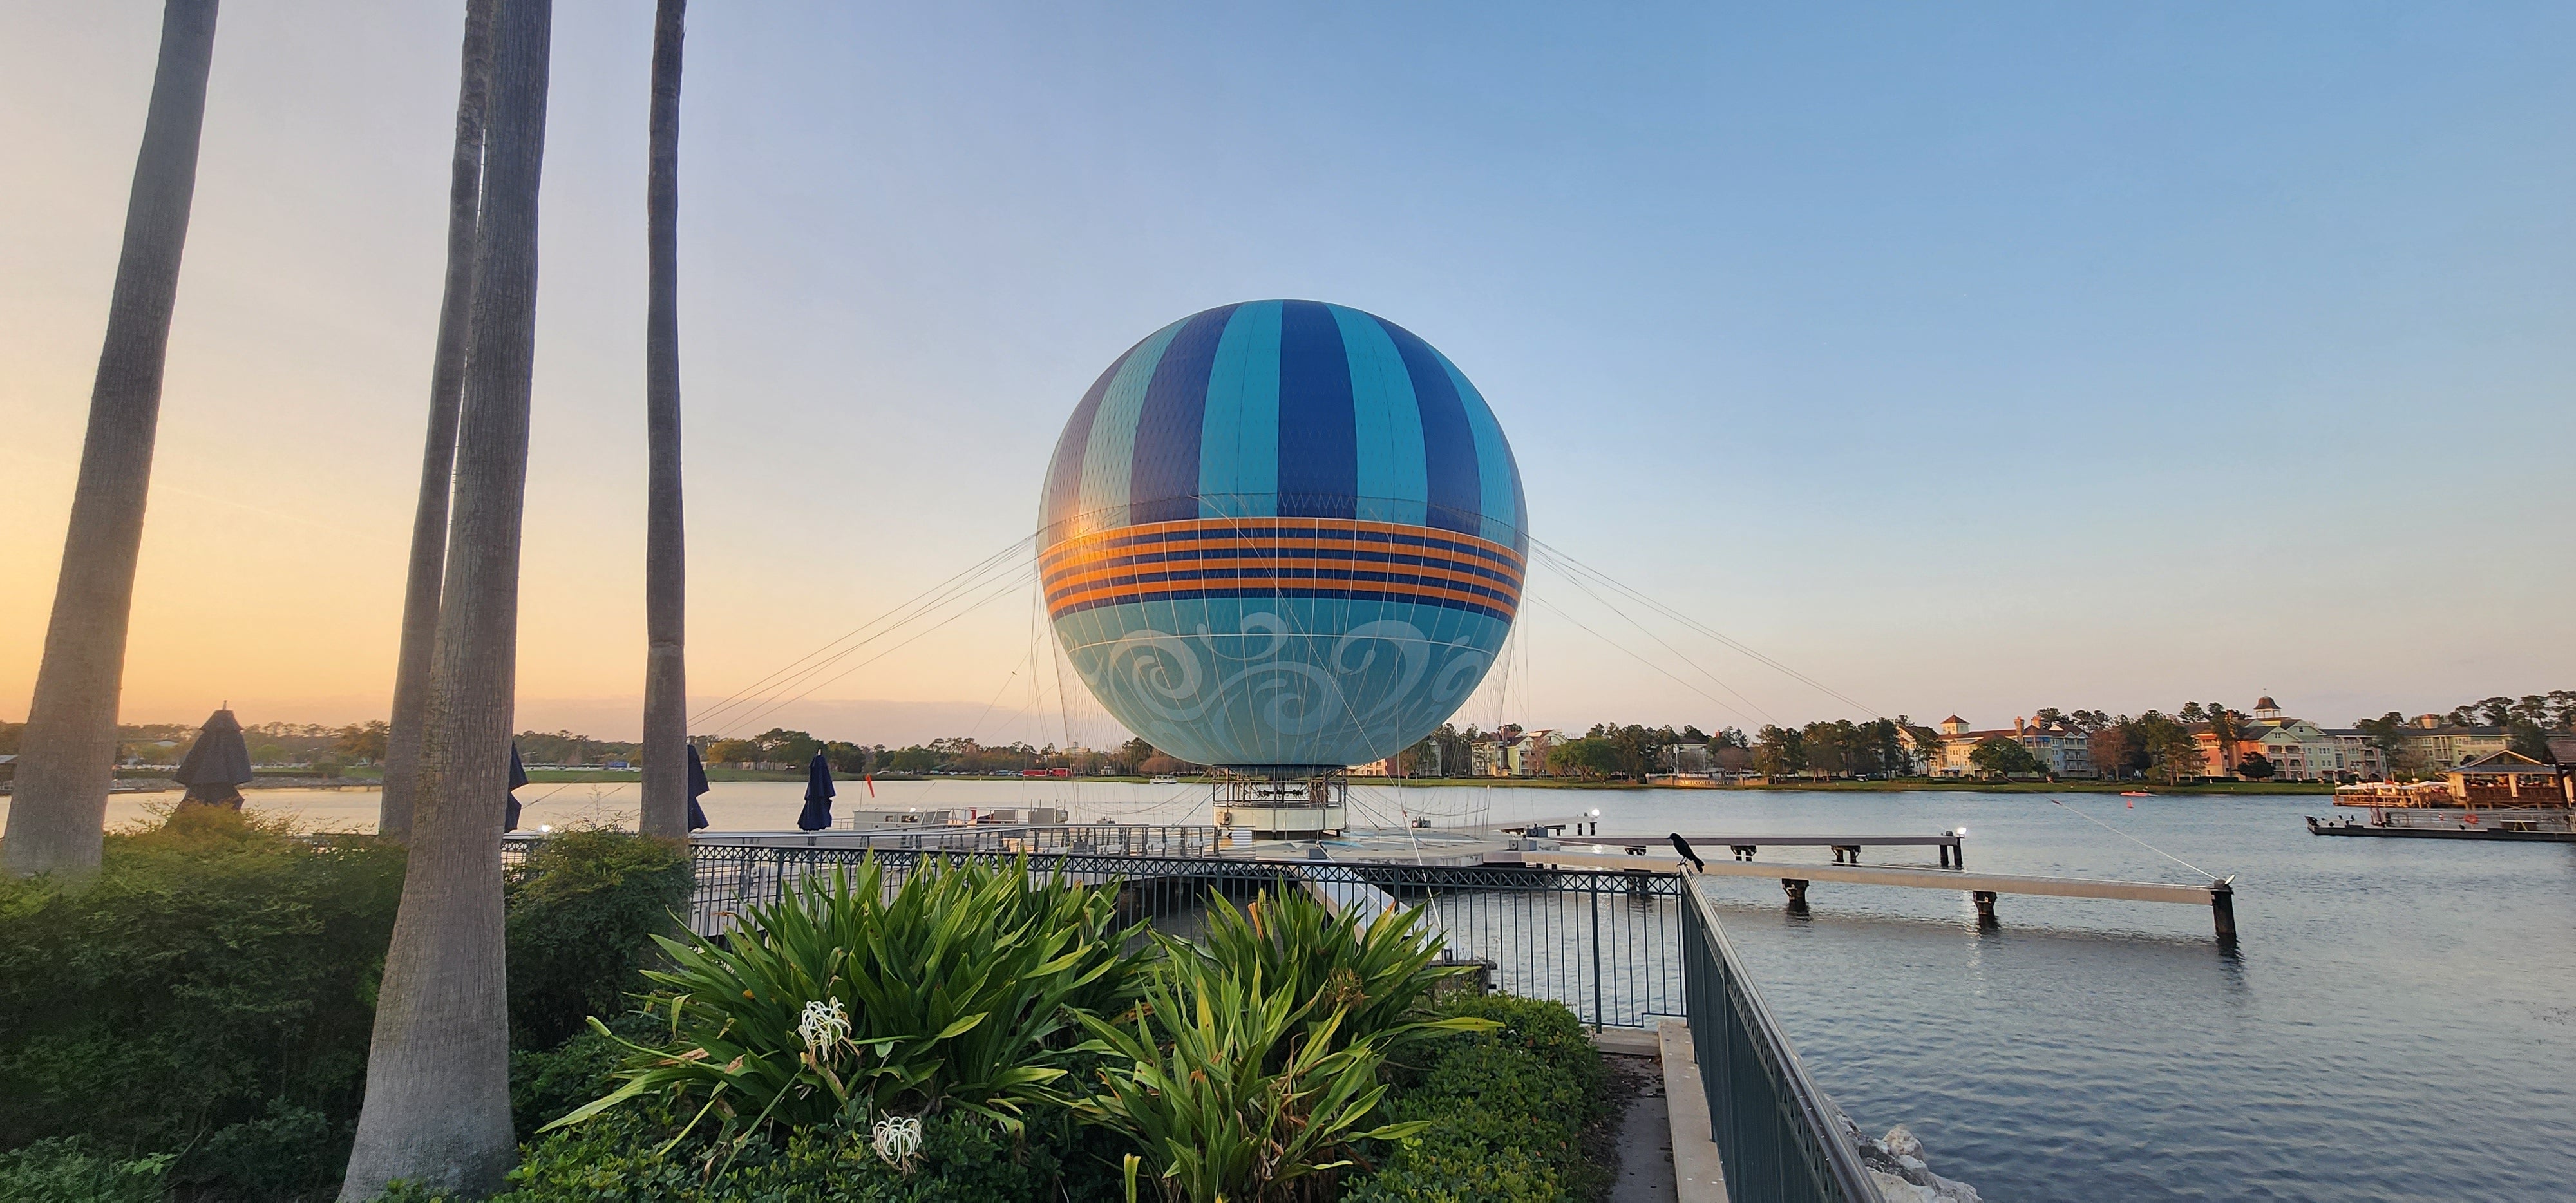 The Most Magical Place on Earth: Disney Springs